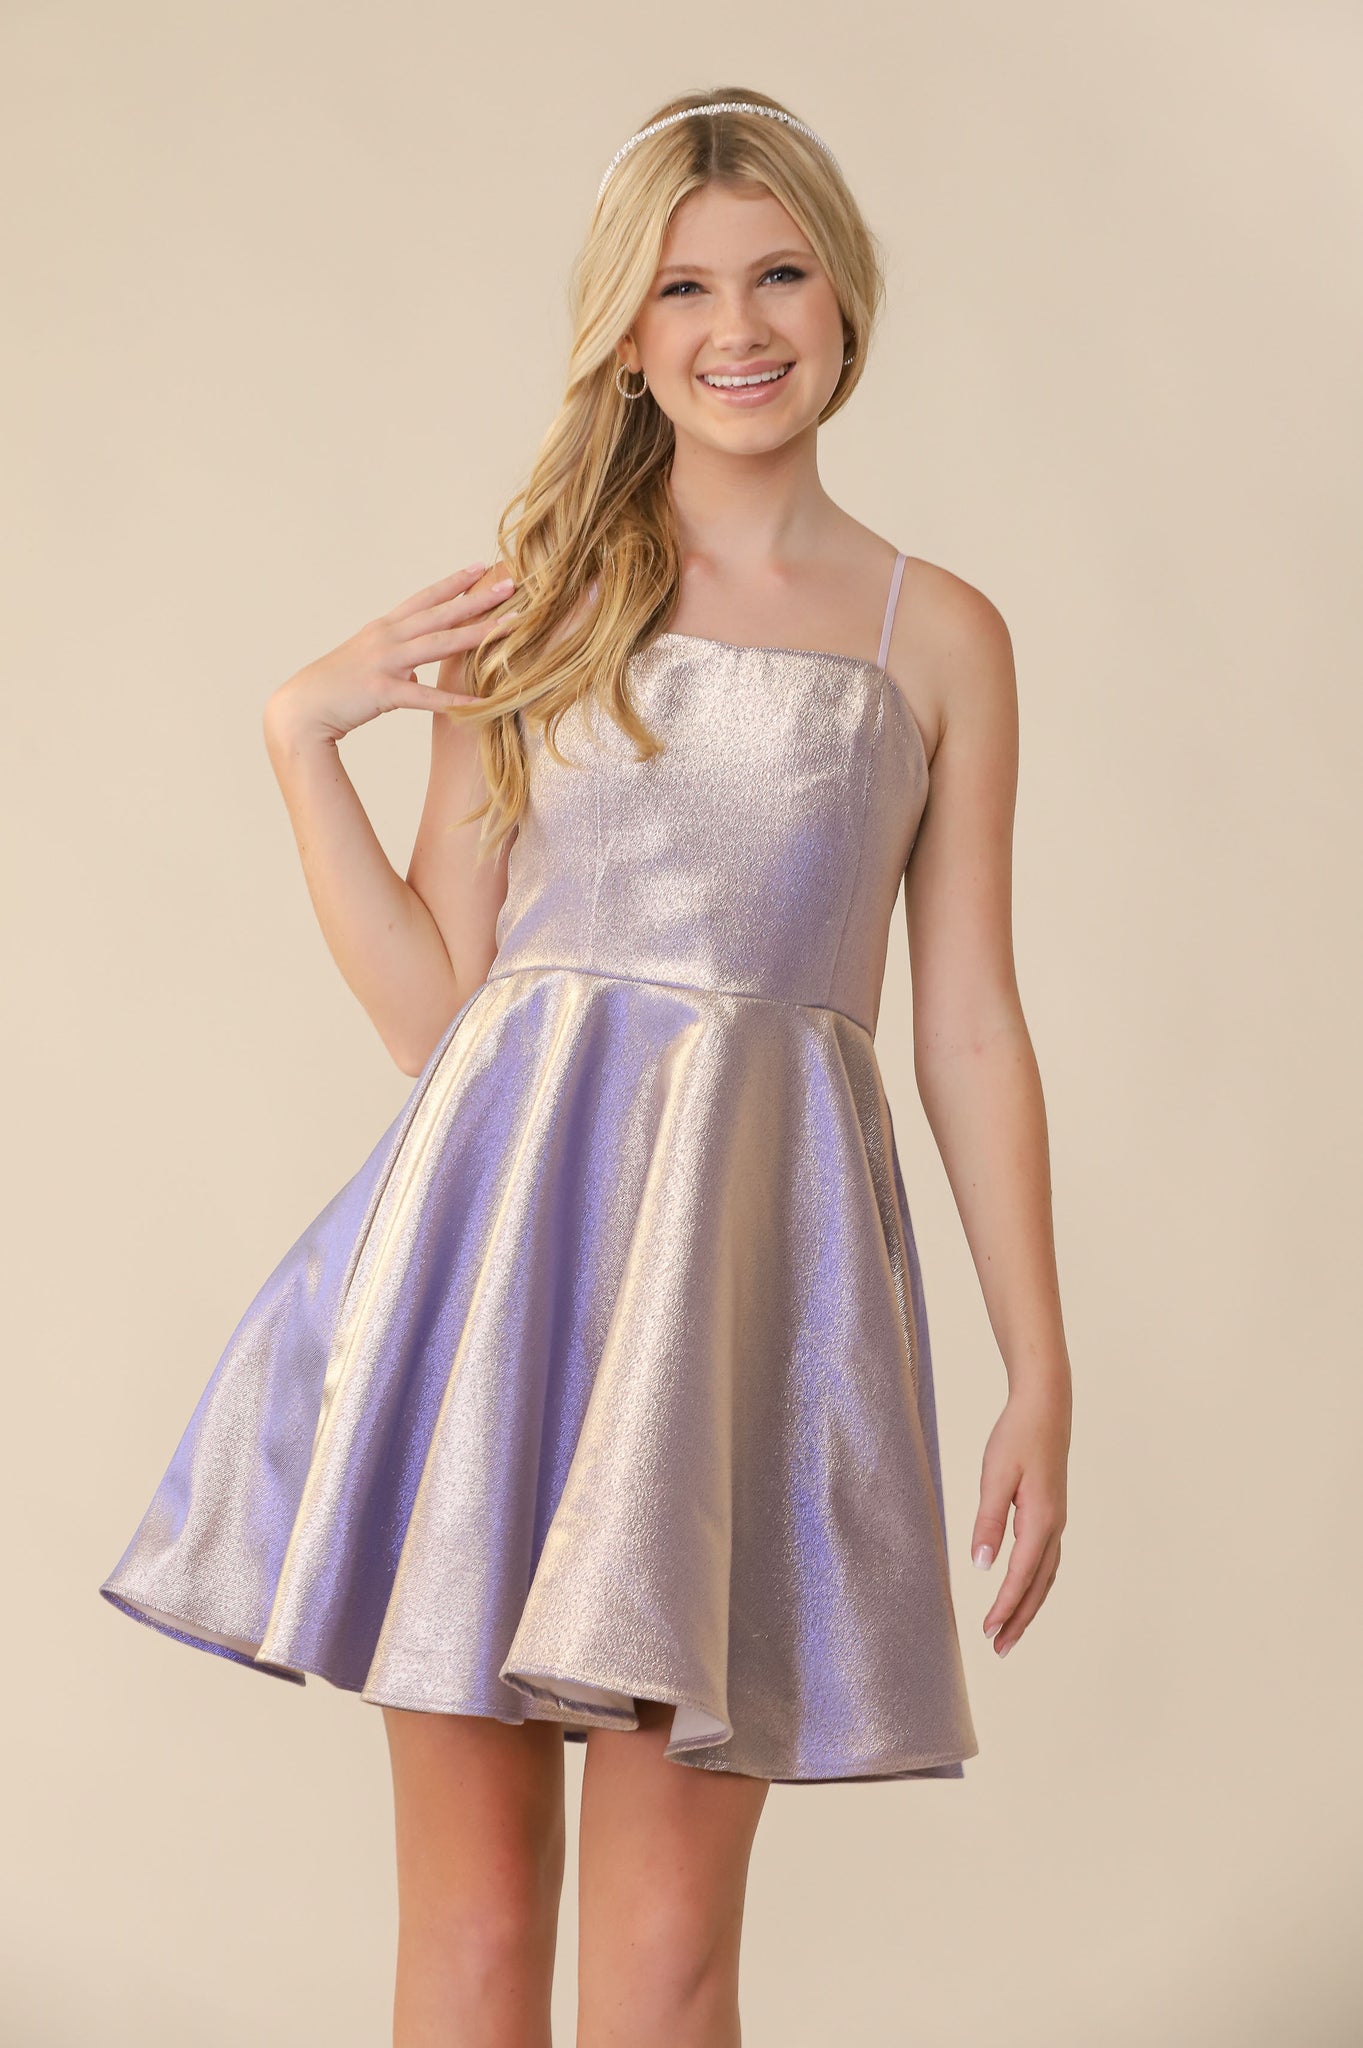 This is an all over soft, lilac glitter jacquard dress with high waist line, zipper back, and adjustable straps for comfort. Hits above the knee and is a perfect dress for any special occasion.